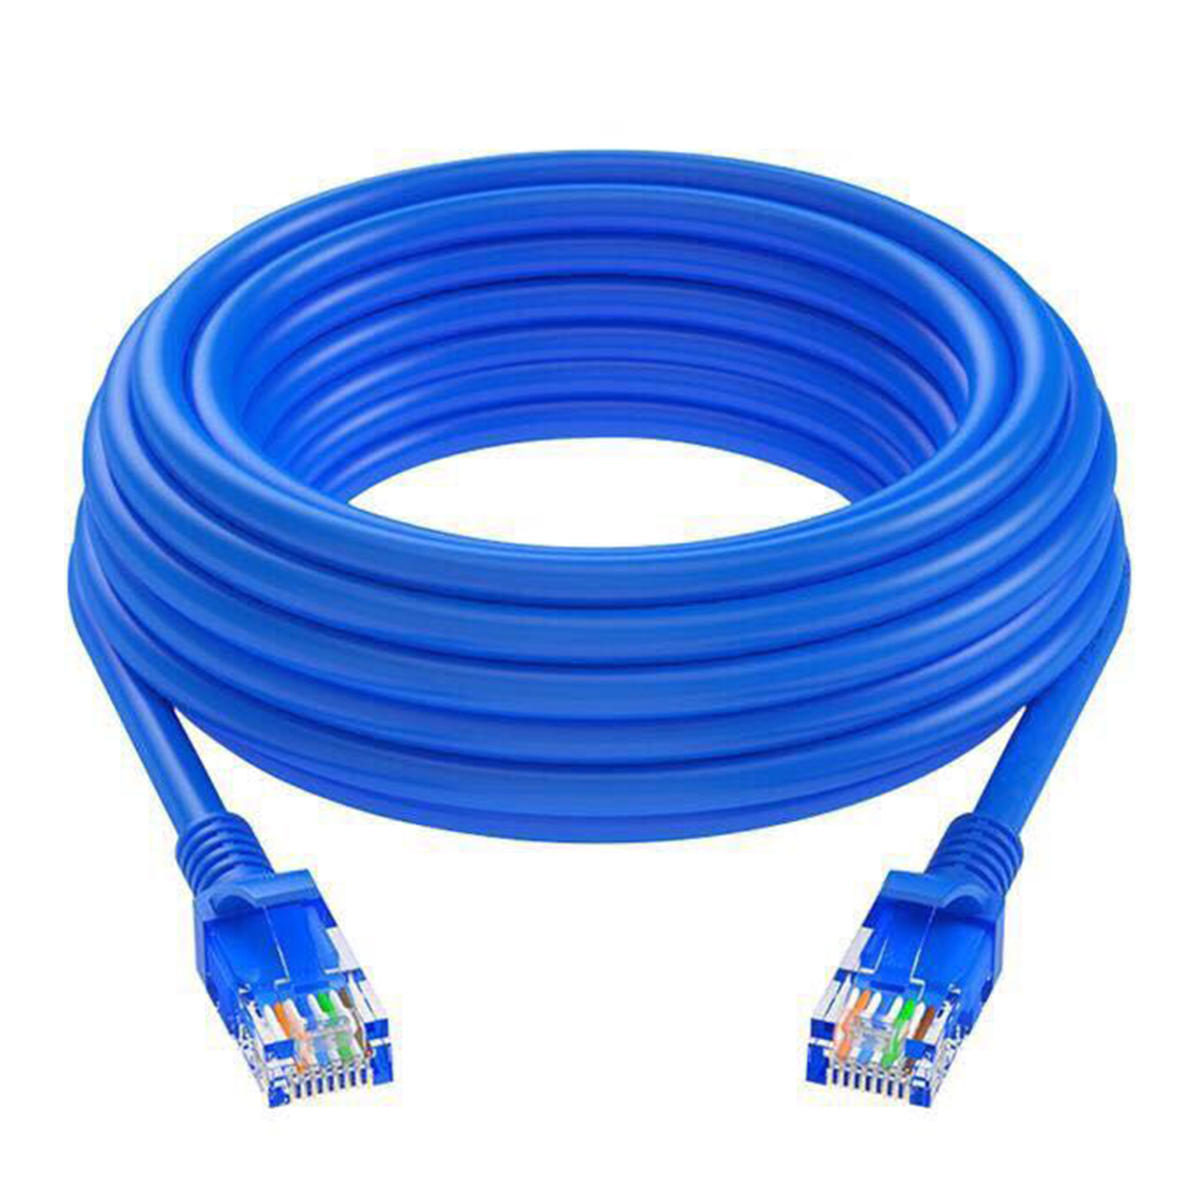 Ethernet Cables from PMD Way with free delivery worldwide